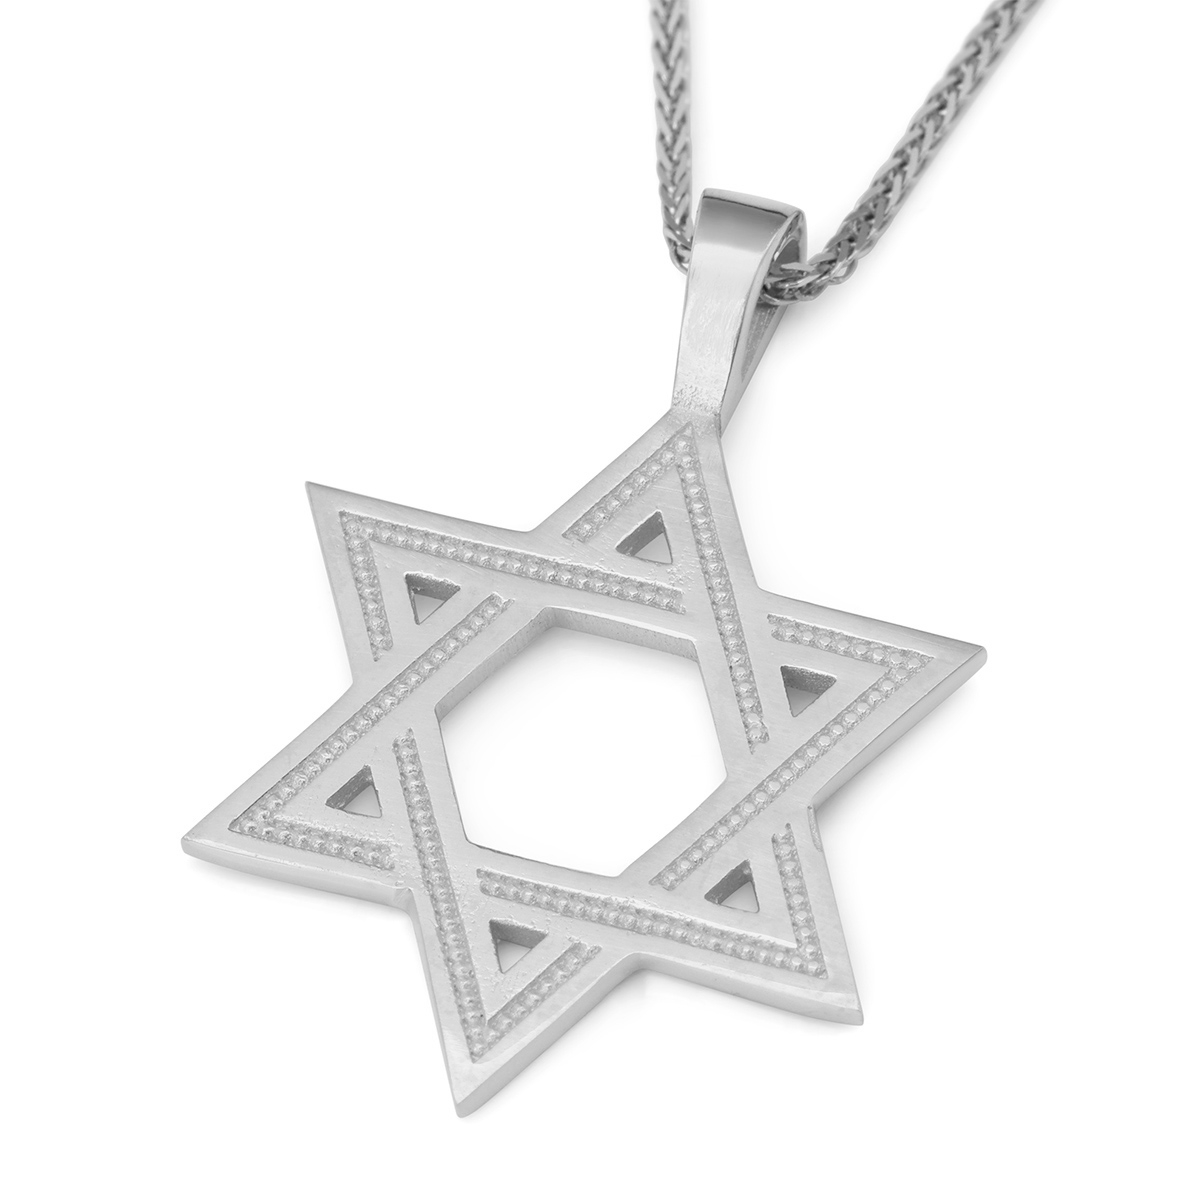 Luxurious 14K Gold Engraved Star of David Pendant Necklace - 1